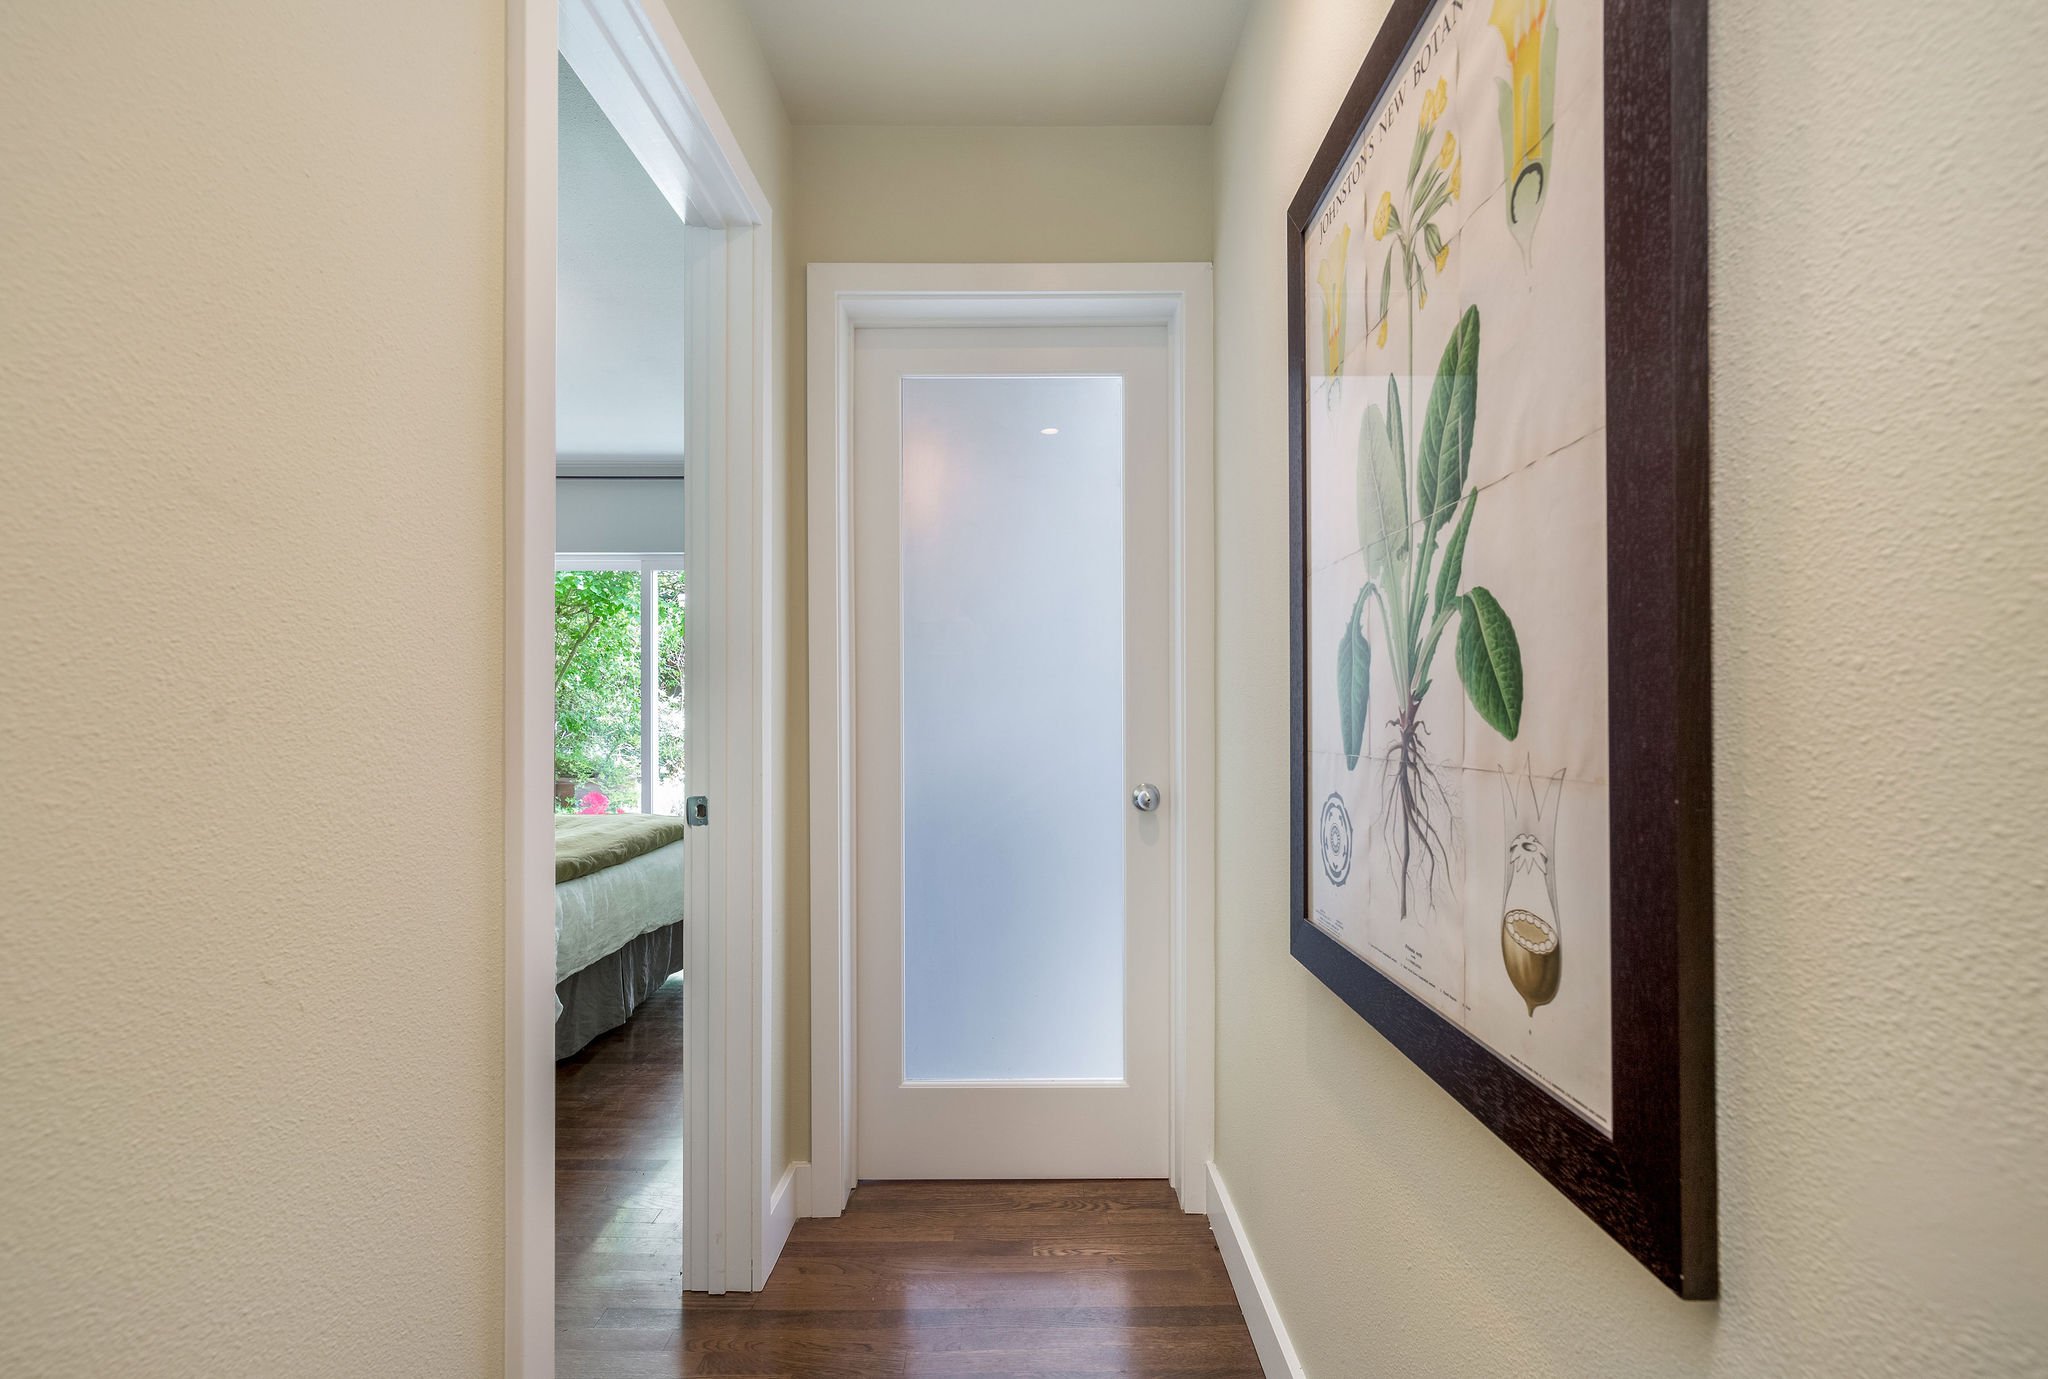  image description: interior of hallway with frosted glass door 